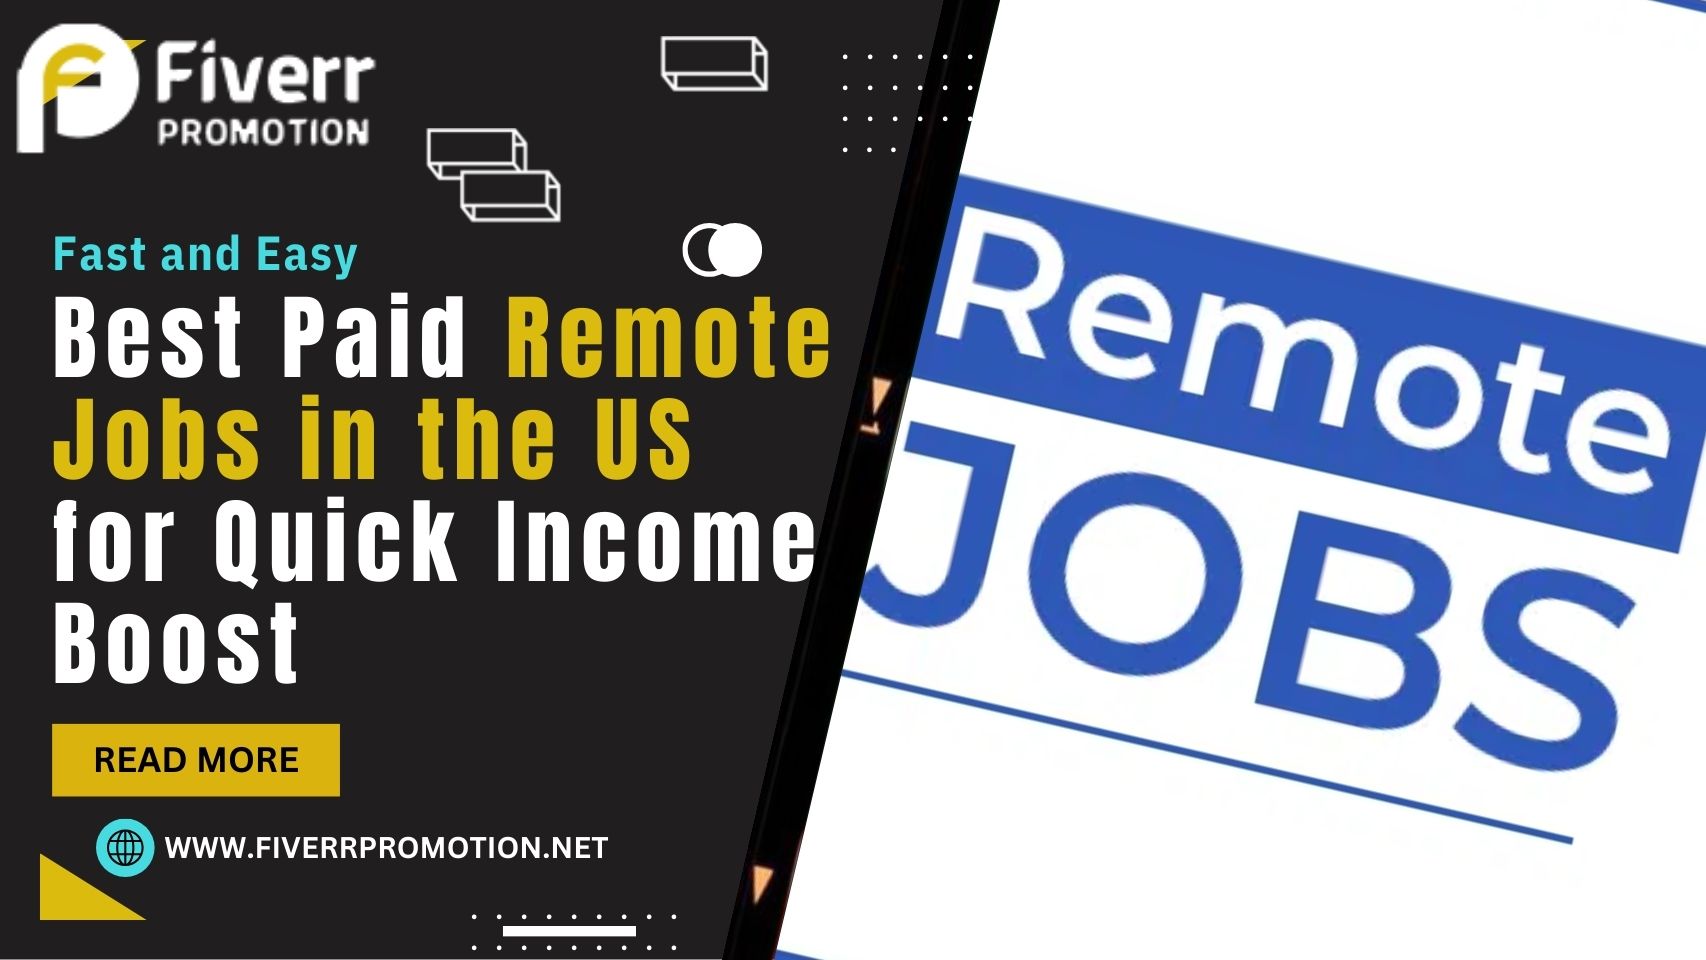 Fast and Easy: Best Paid Remote Jobs in the US for Quick Income Boost